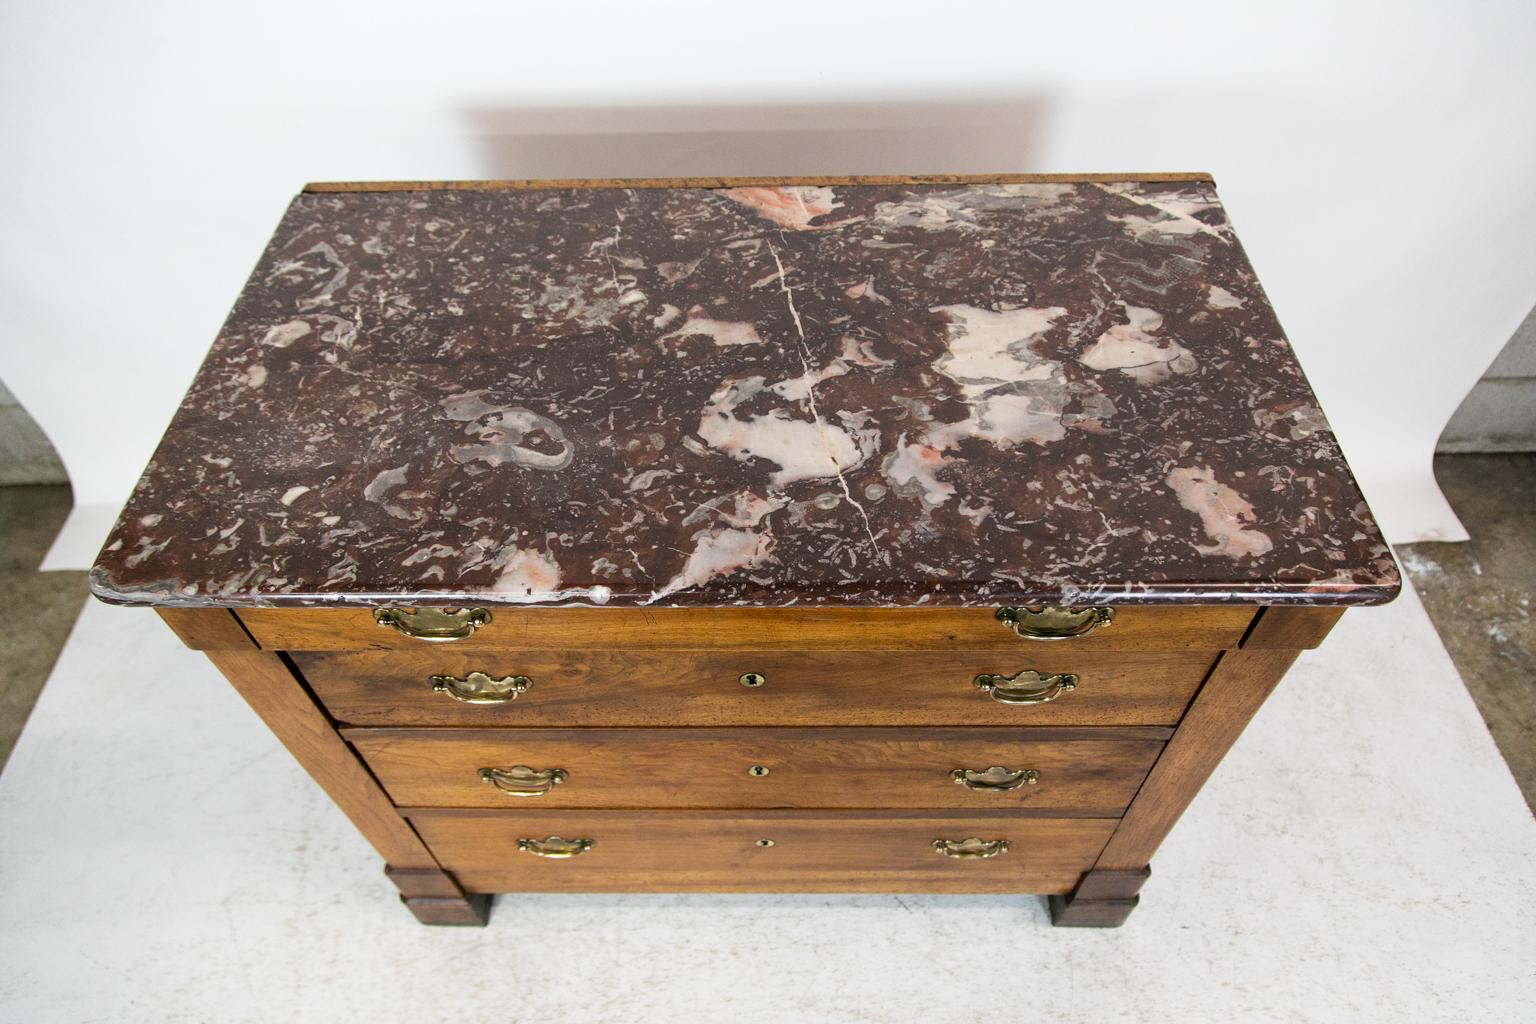 This French walnut marble-top chest has the original bull nose marble top which has a one-inch wooden retaining strip at the back. The top drawer has a 1/2inch overhang over the three lower drawers. The brass keyhole escutcheons are original, but